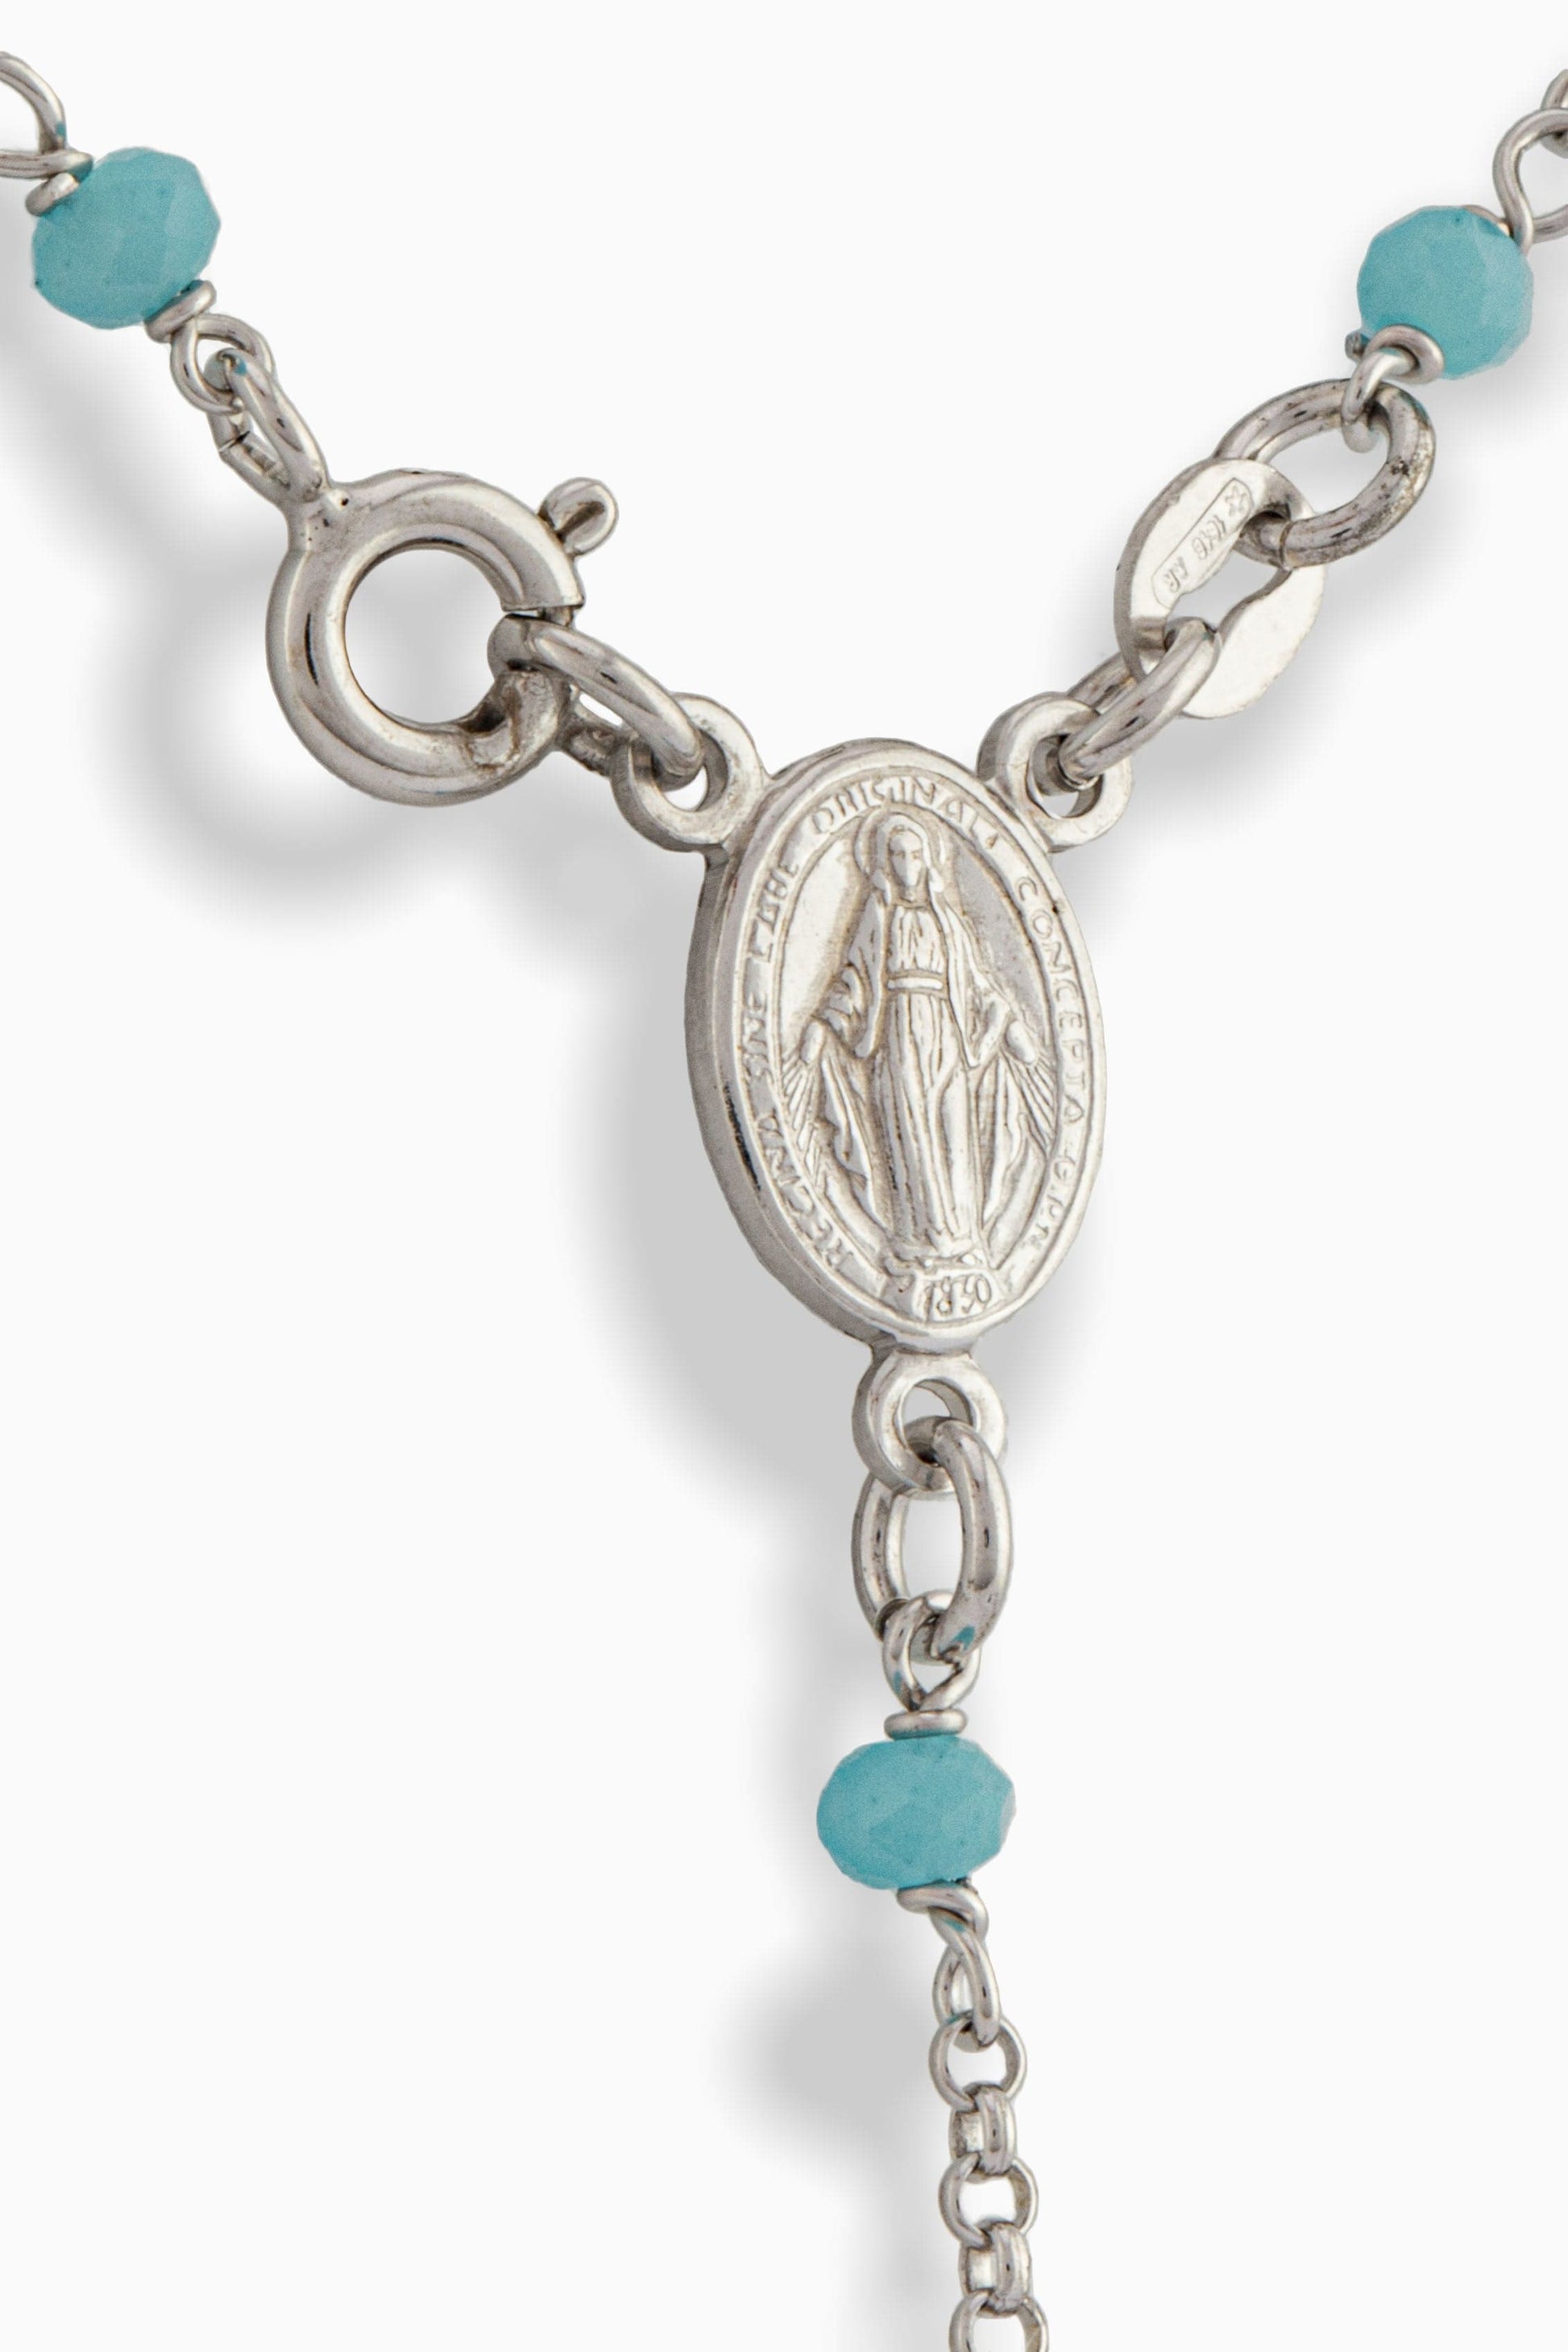 MONDO CATTOLICO Prayer Beads Cm50 (19.7 in) Miraculous Mary Rosary Blue Beads in Sterling Silver